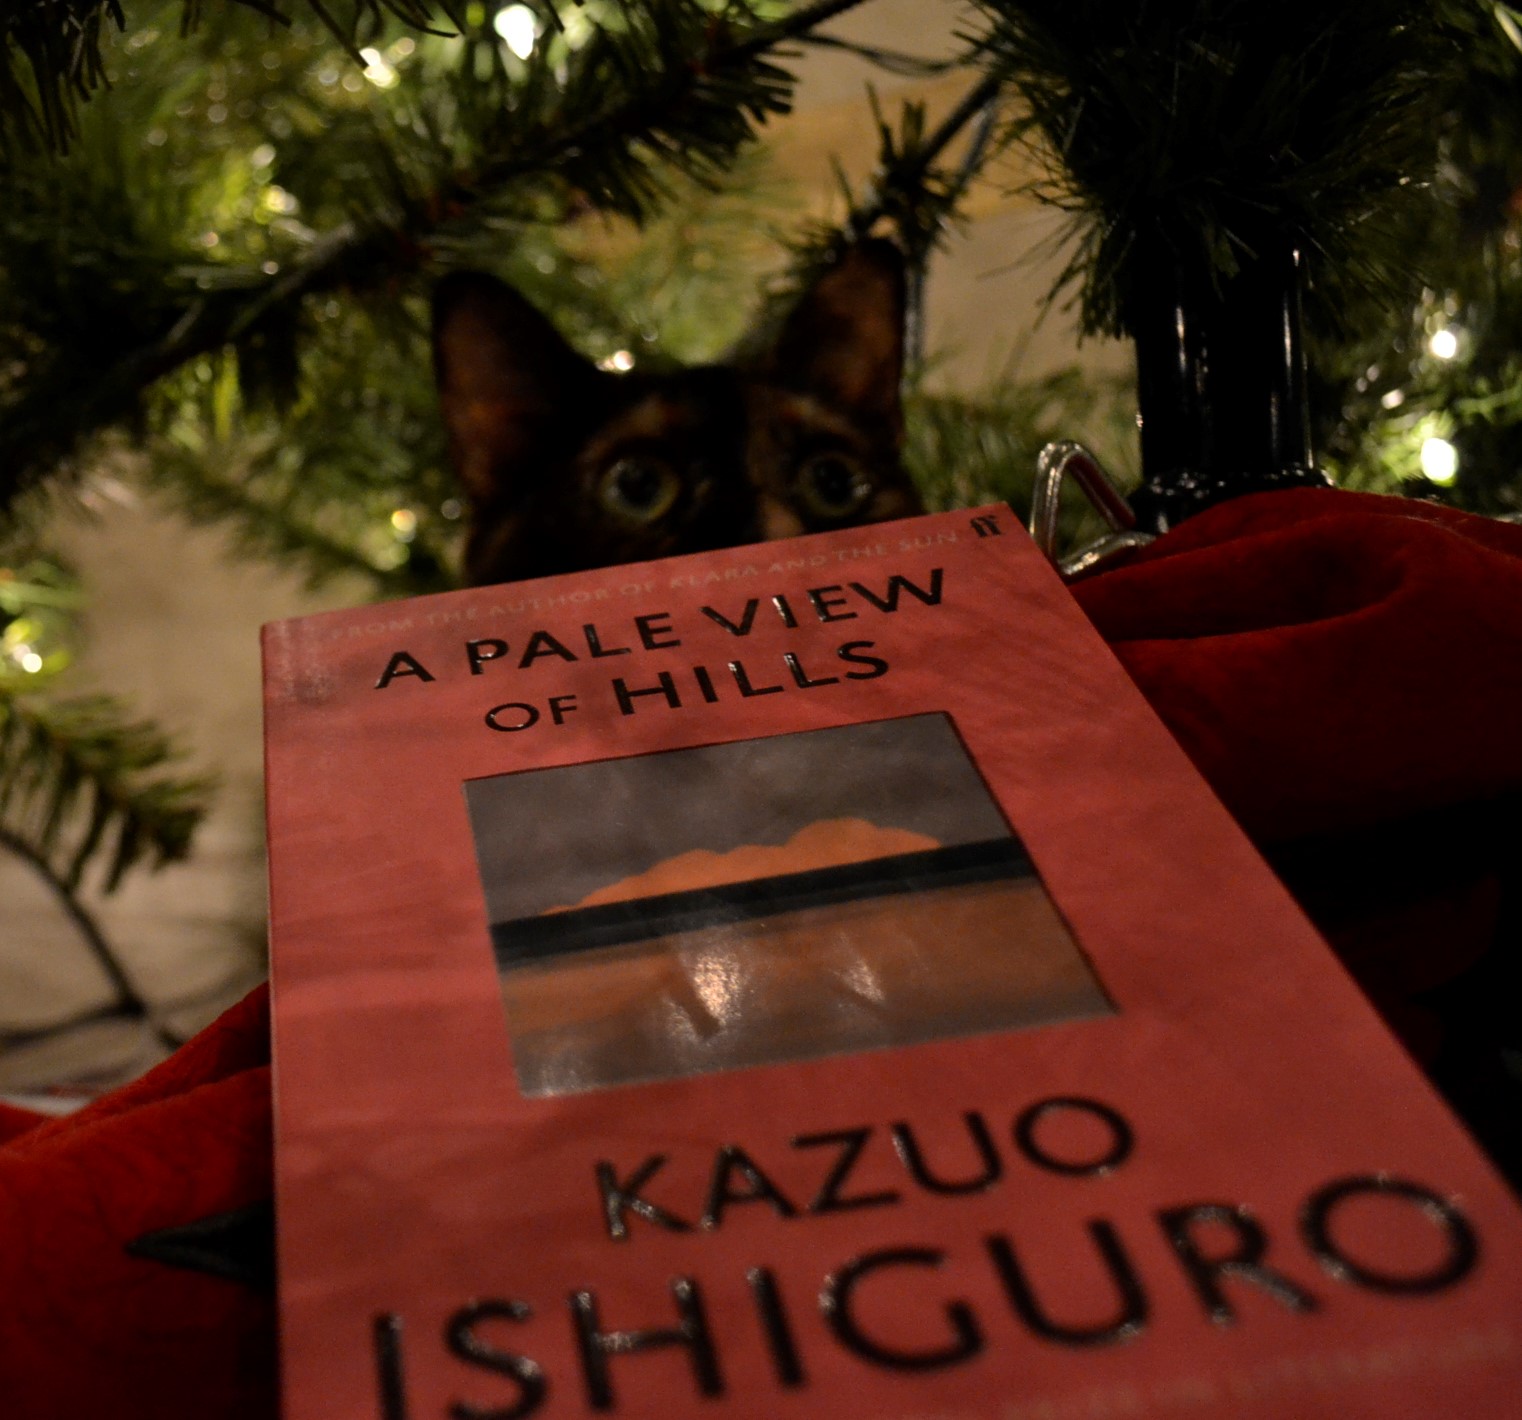 A tortoiseshell cat with wide eyes peeks over the top of a book. The cat his hiding beneath a Christmas tree.